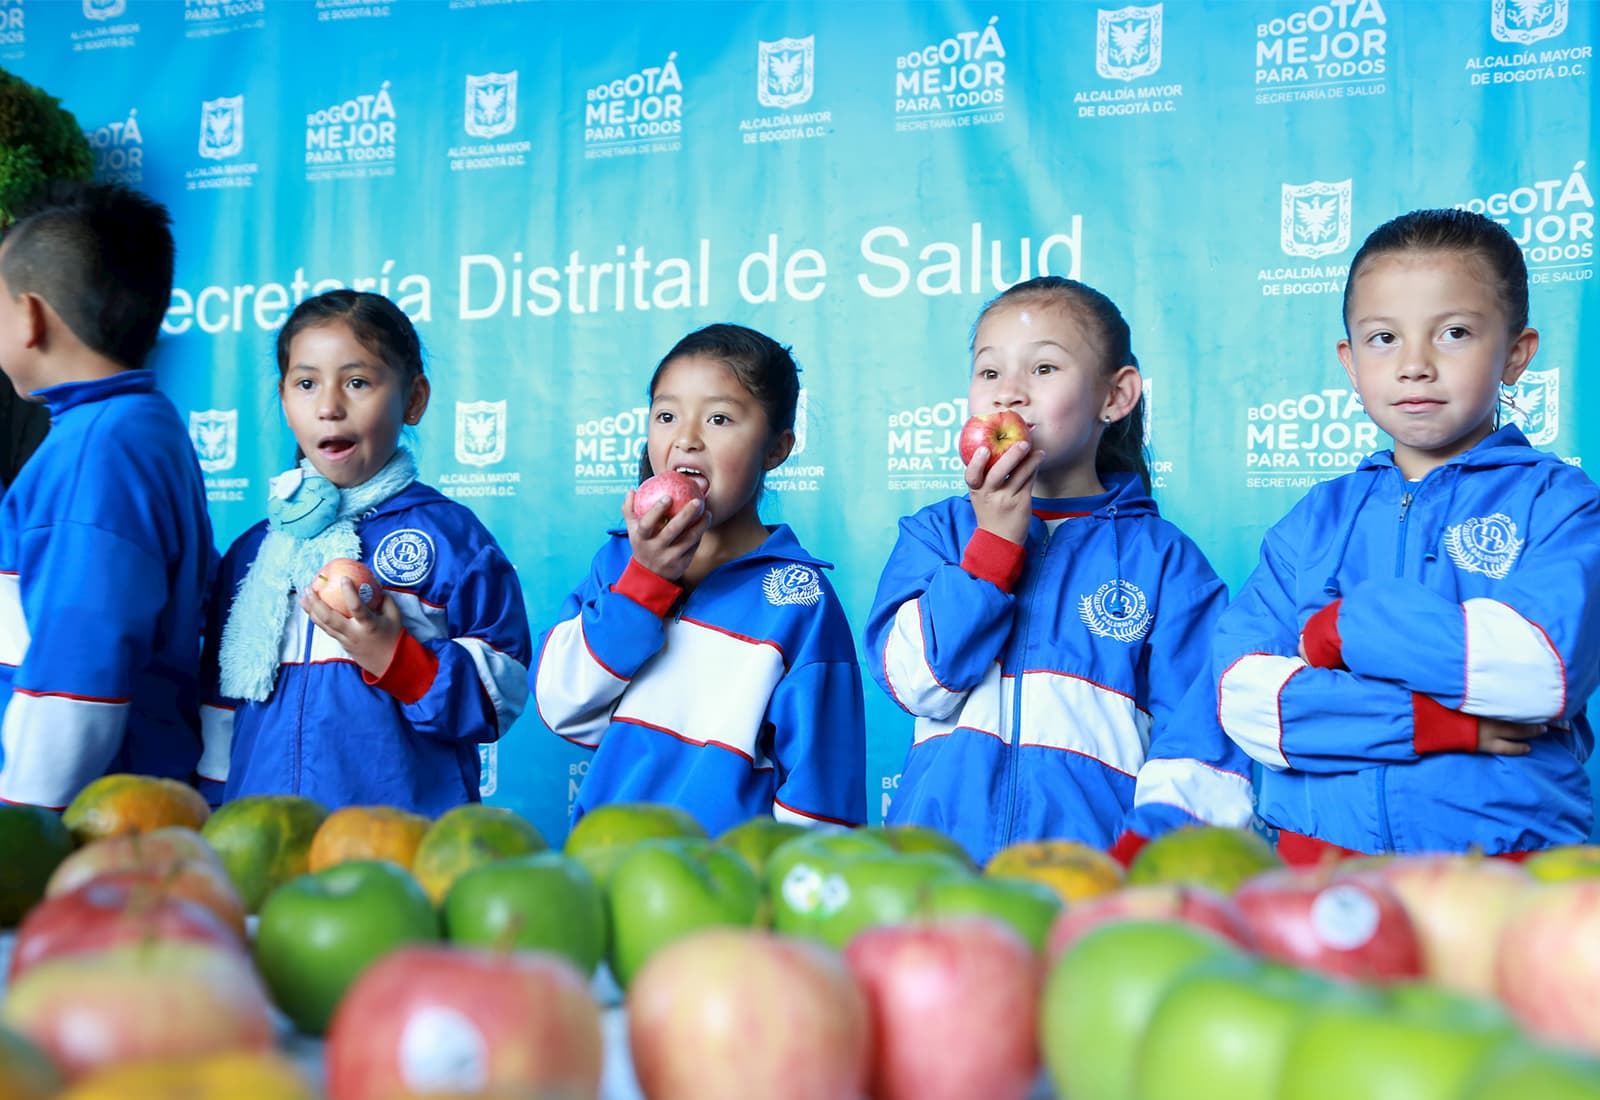 Students in Bogotá, Colombia benefit from the city’s participation in the Partnership for Healthy Cities as it implements policies to encourage healthy eating.